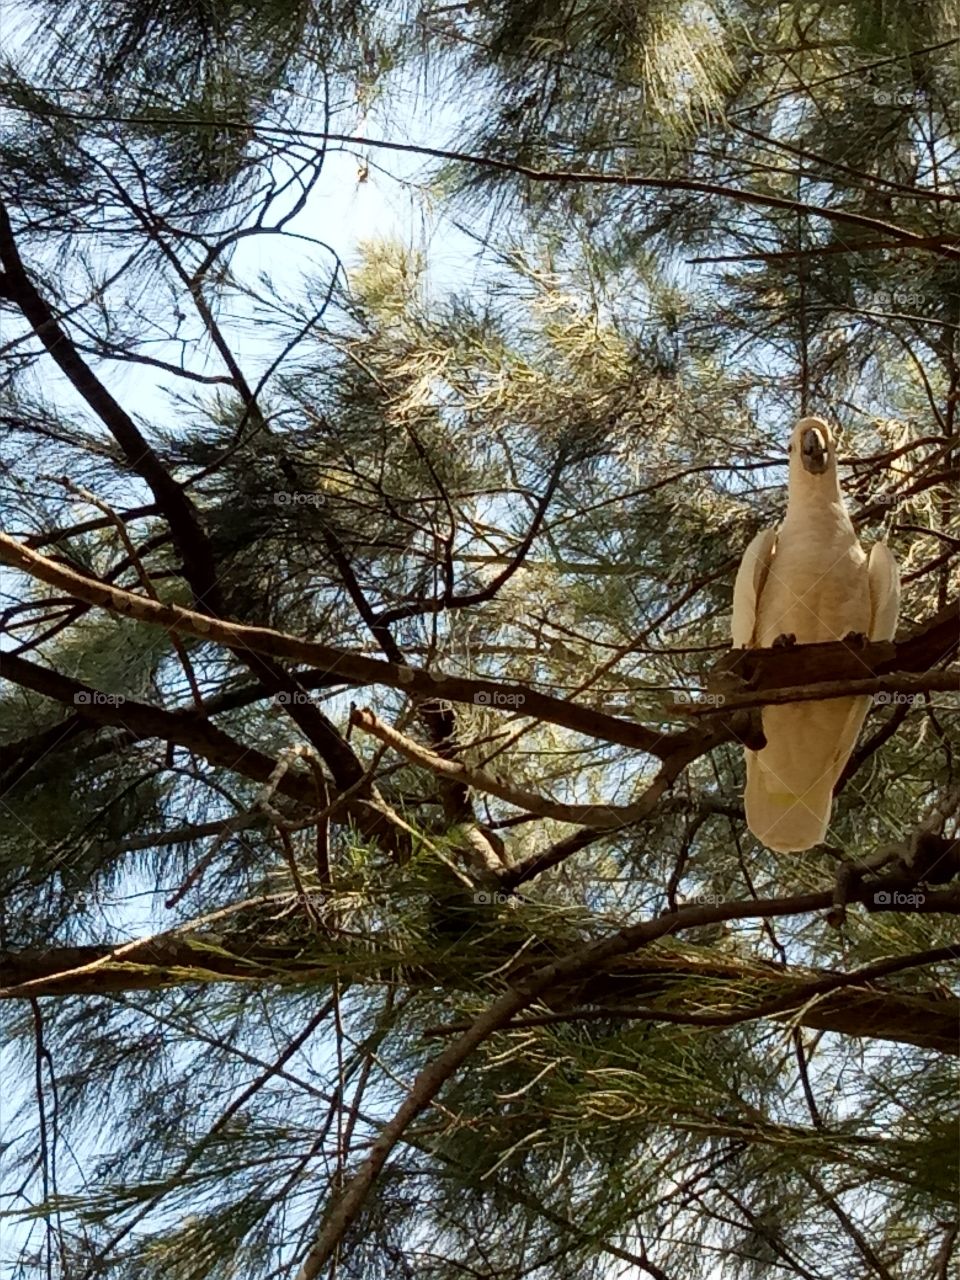 A Cockatoo in a tree